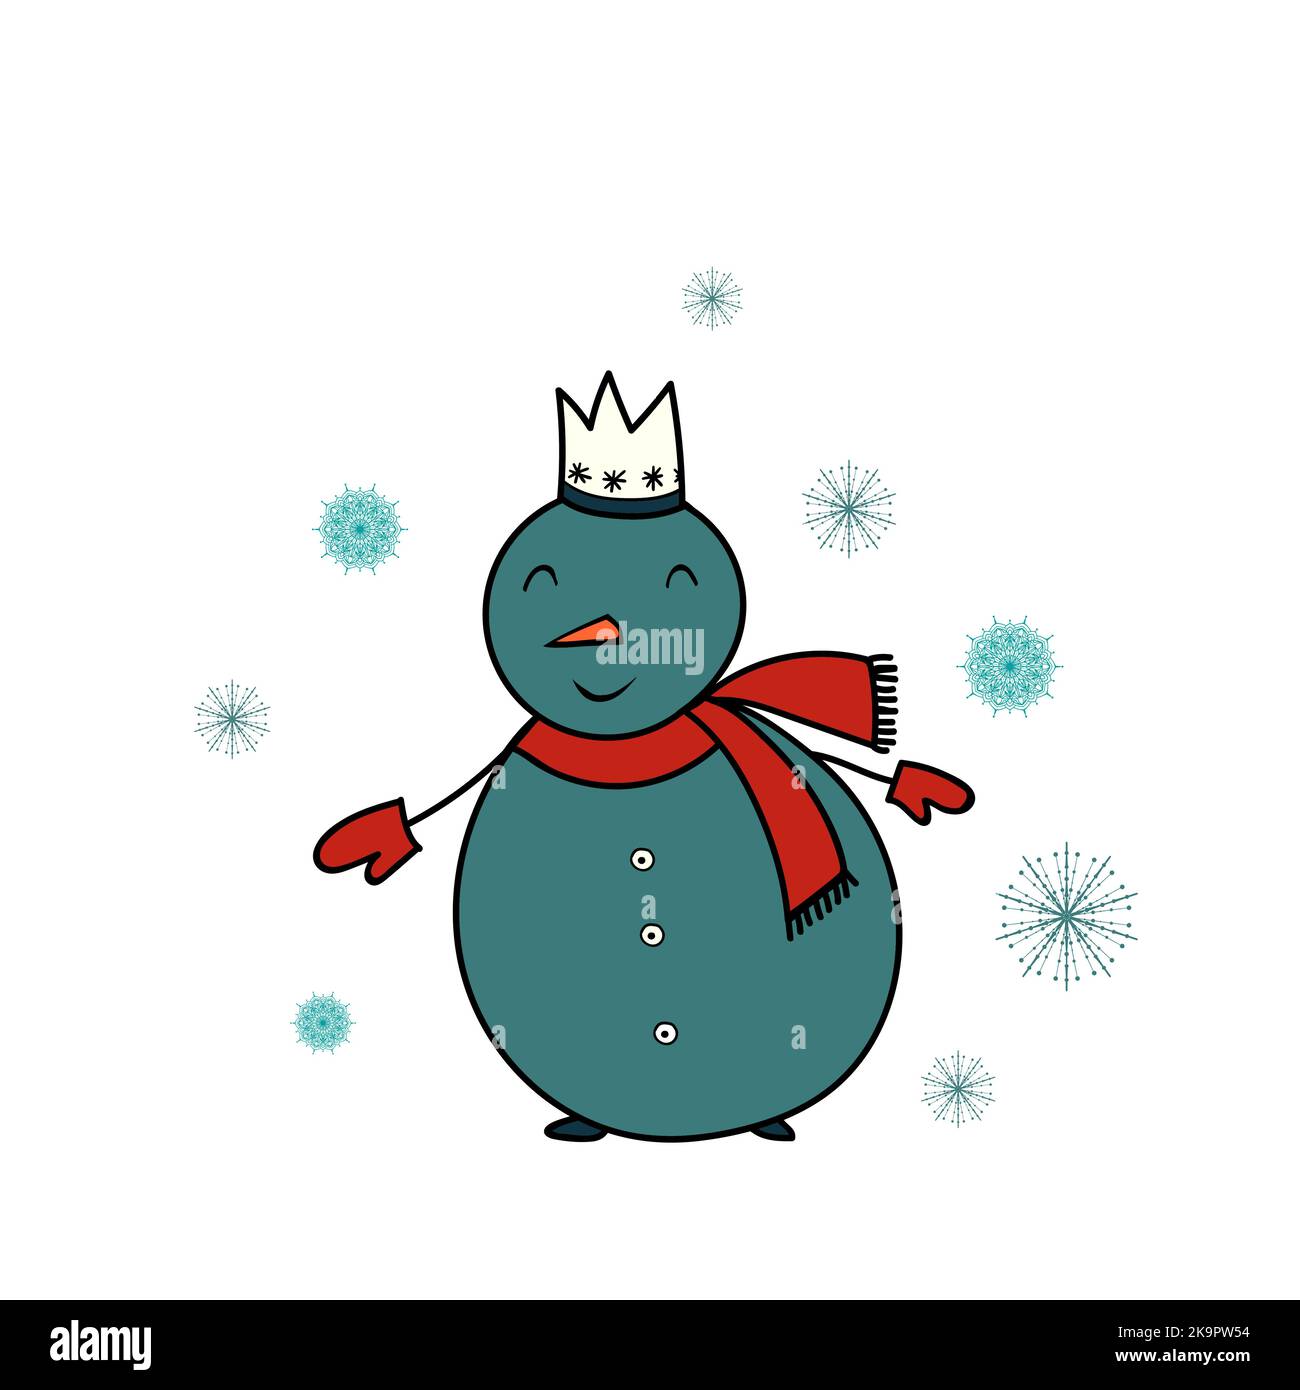 Funny snowman. Colorful image. Illustration in cartoon style for stickers, cards, invitations, stationery design Stock Vector